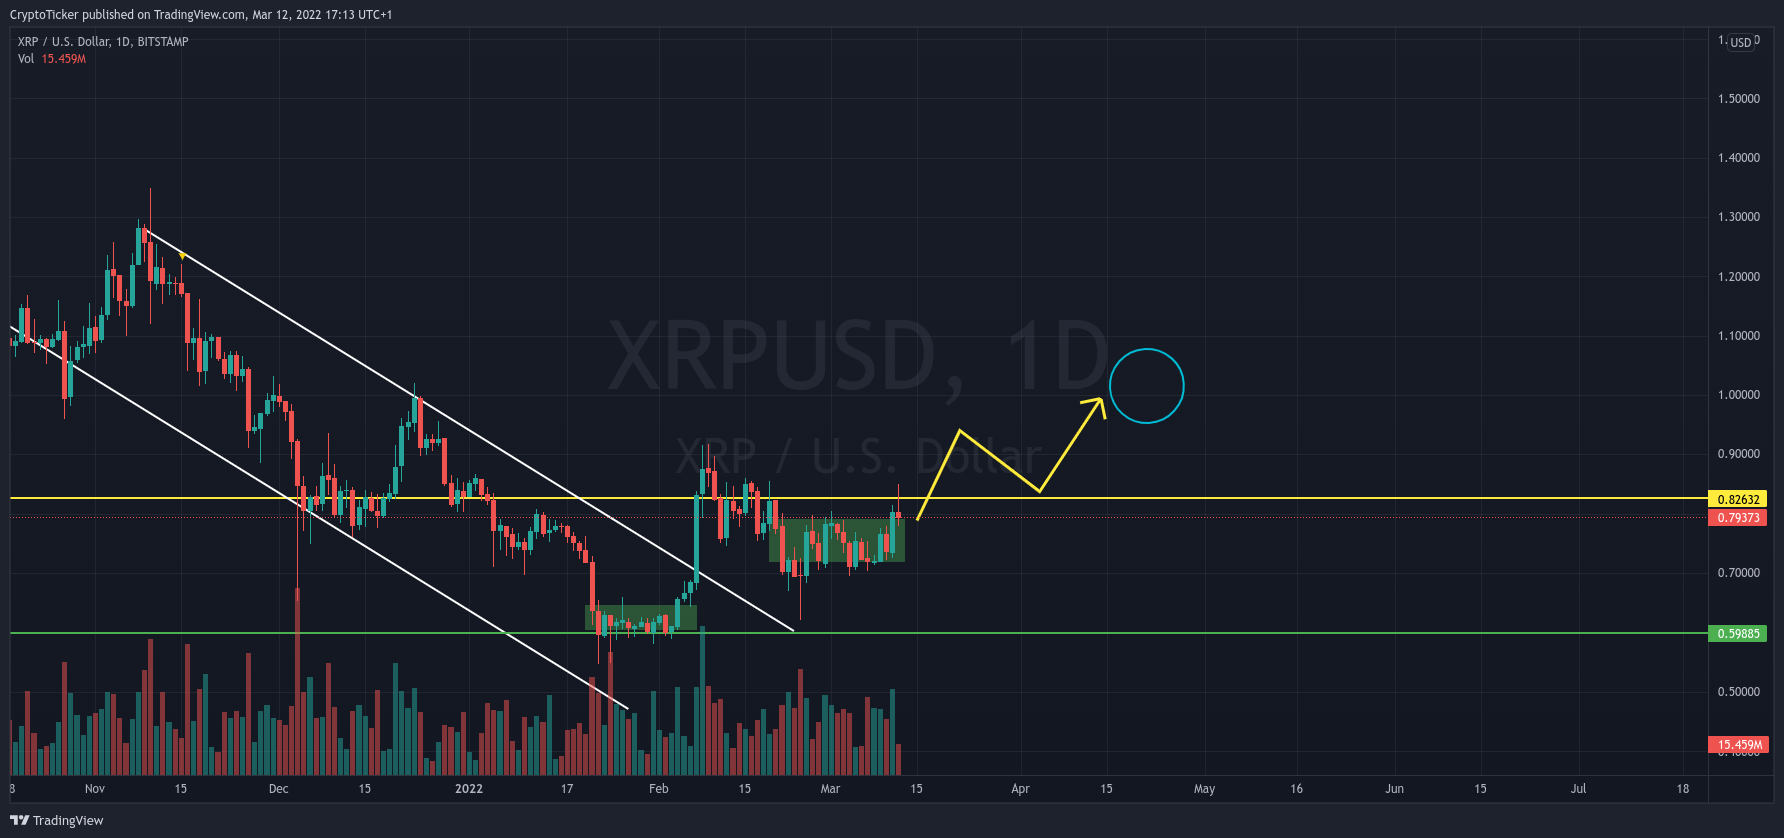 XRP/USD 1-day chart showing the potential uptrend of XRP